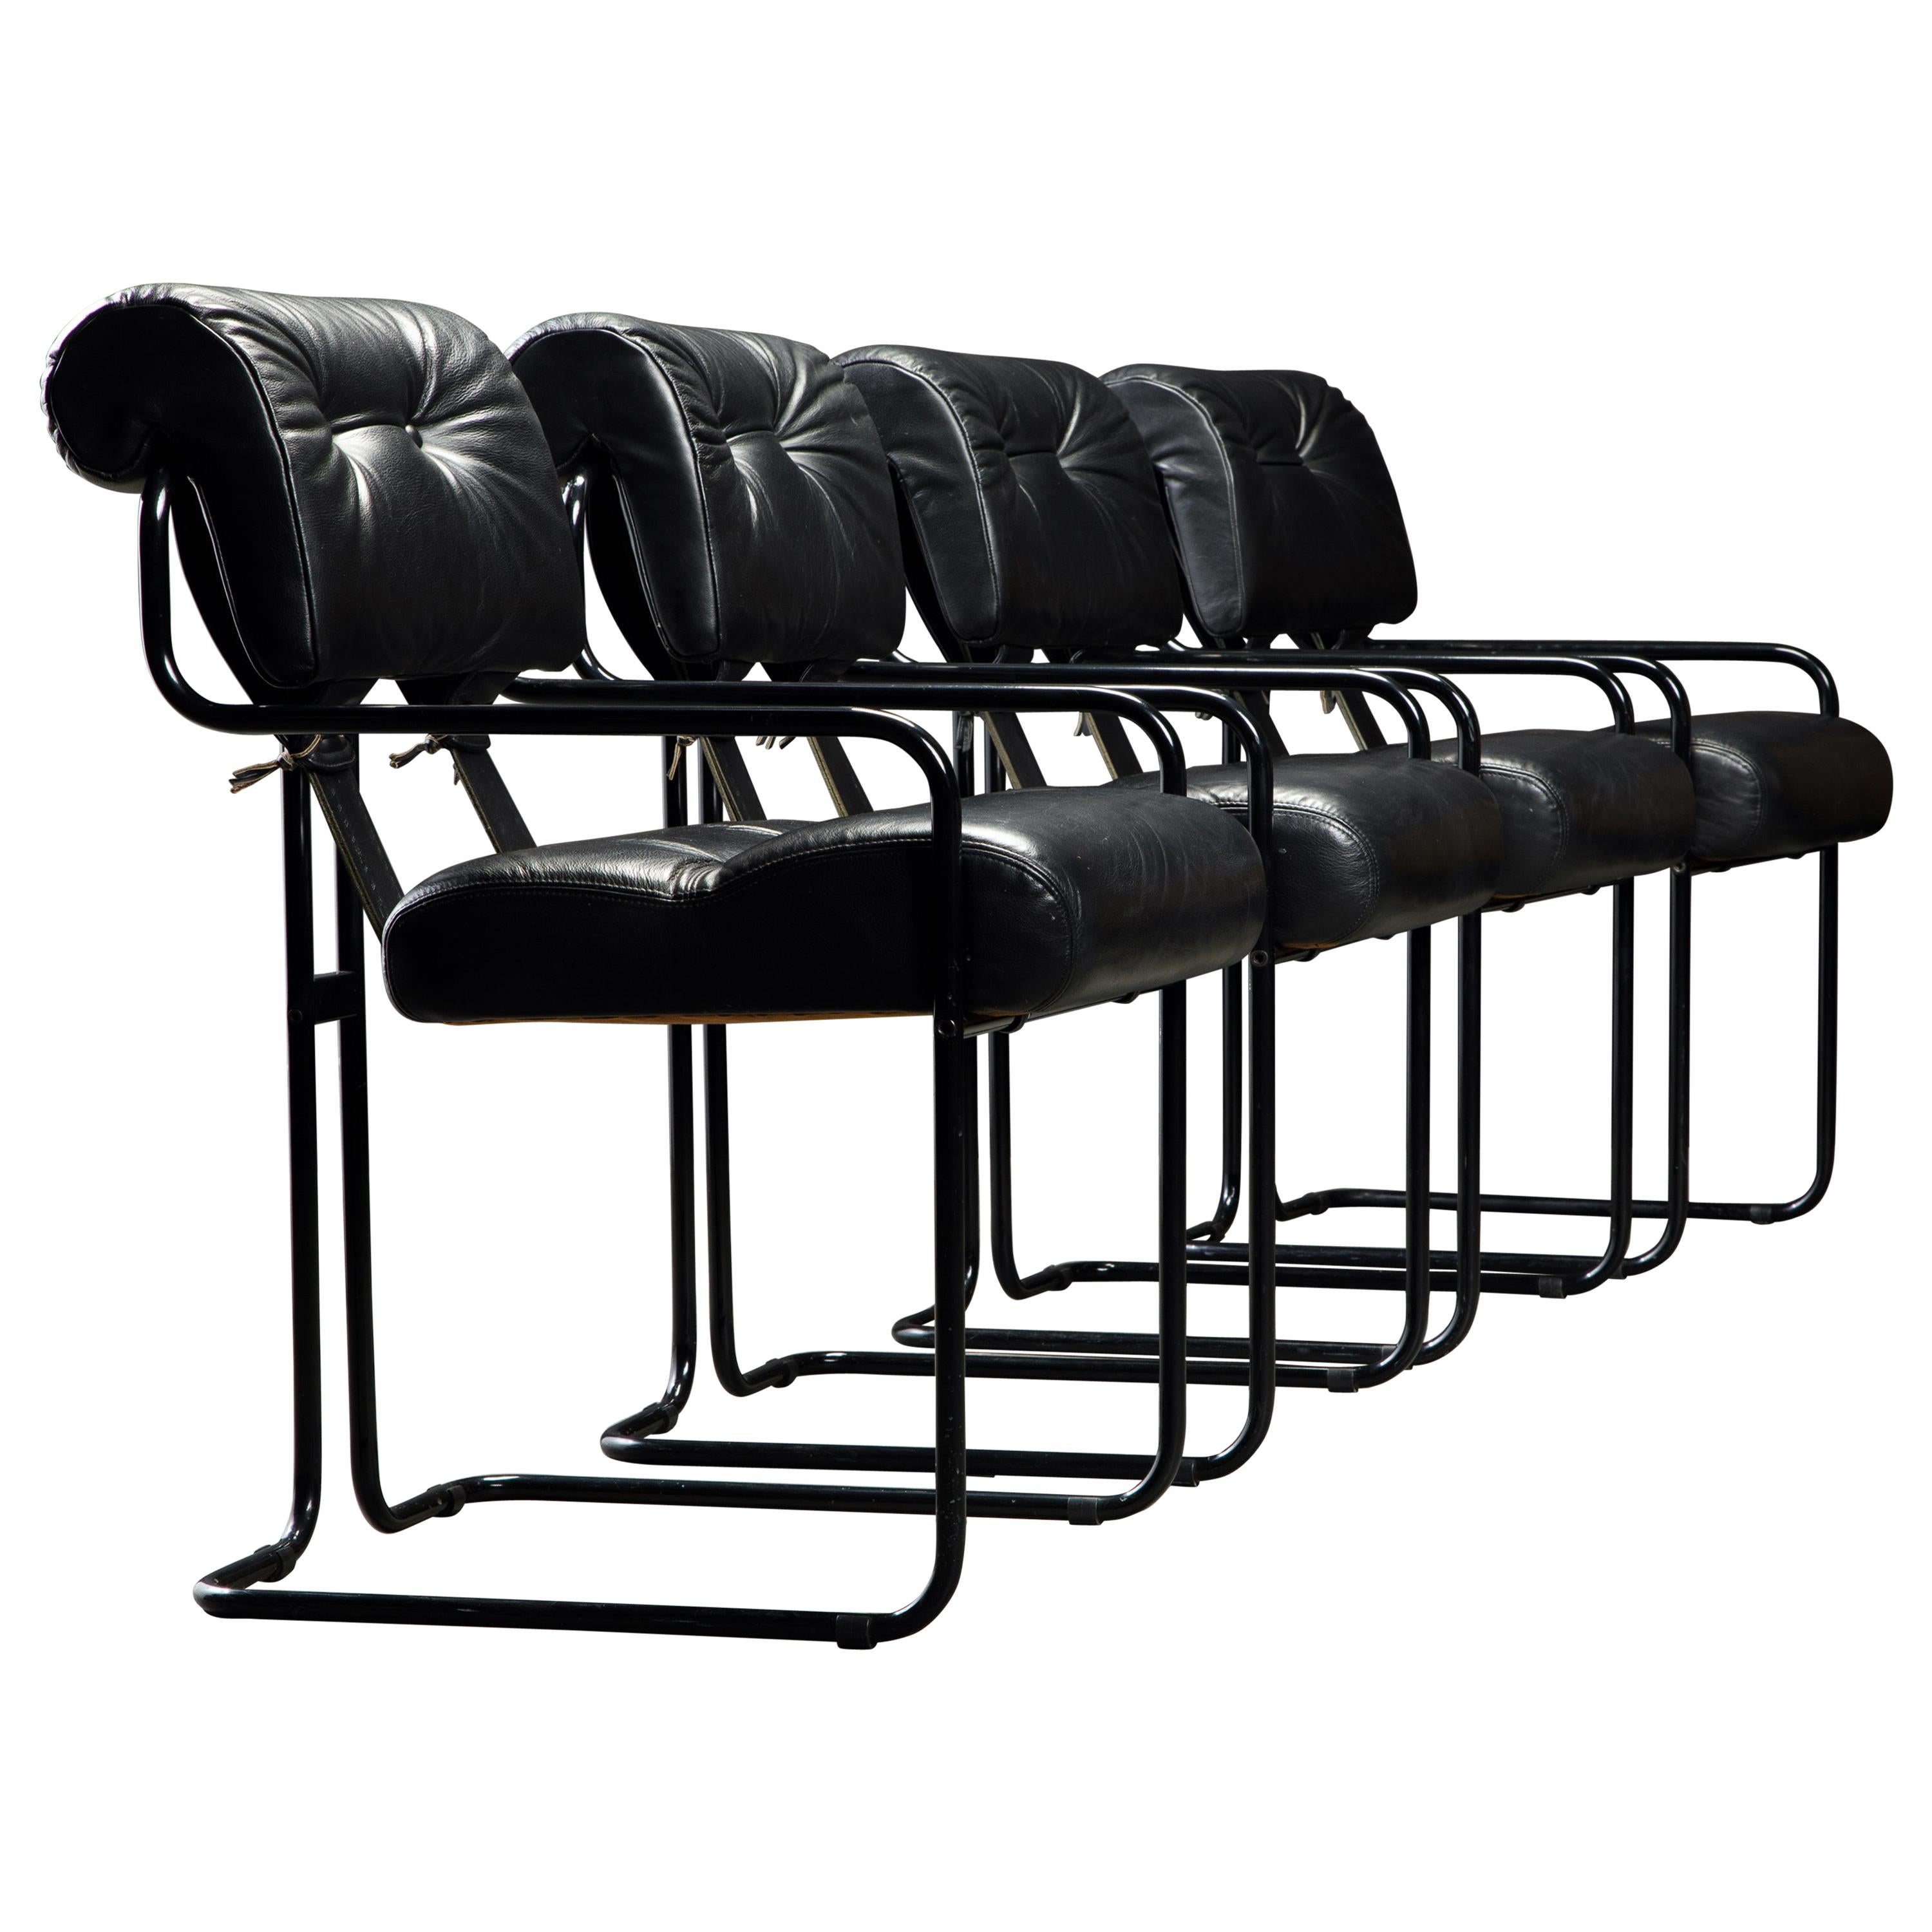 Black on Black Tucroma Chairs by Guido Faleschini for i4 Mariani, 1980s, Signed